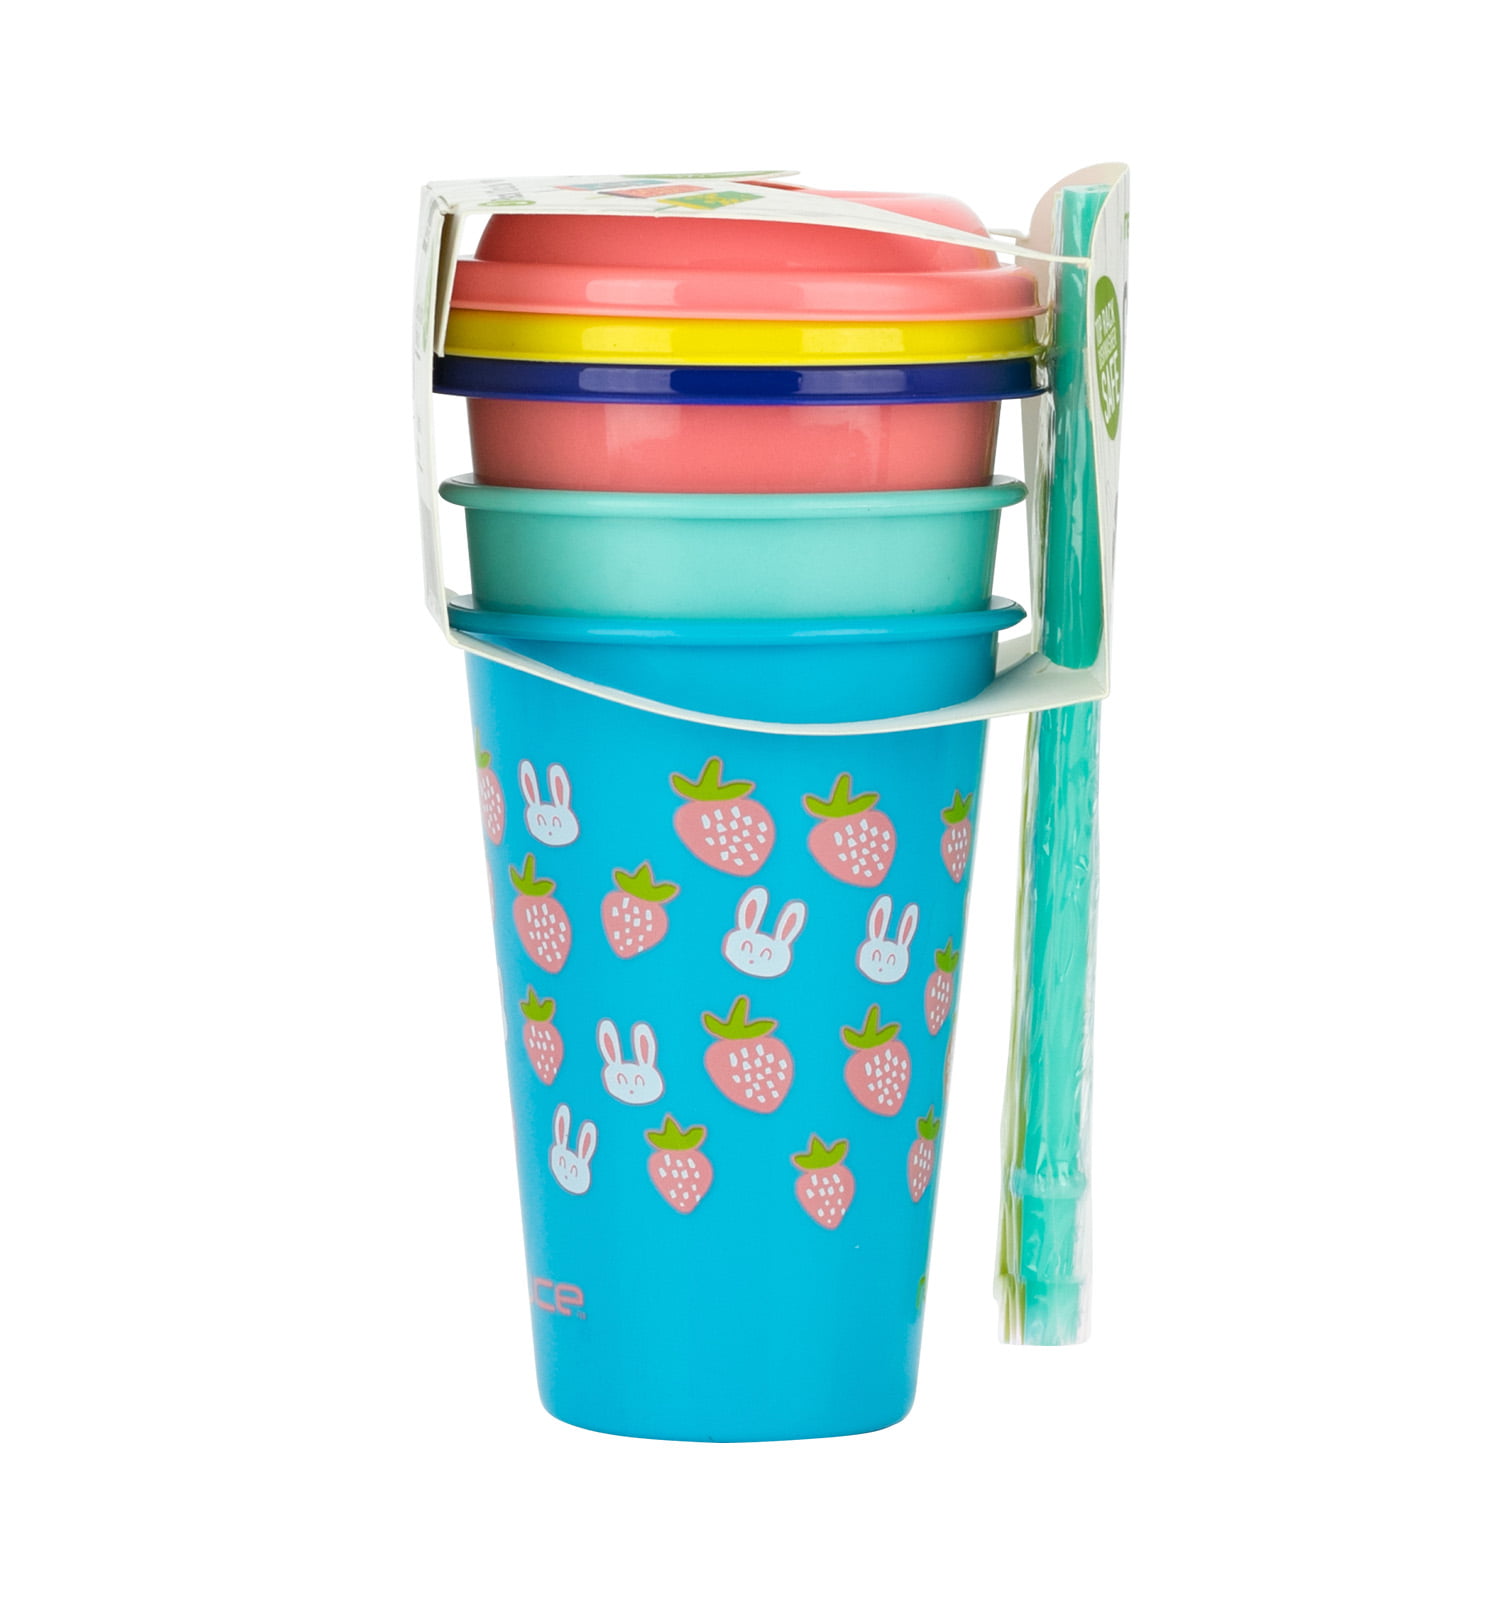 Home Tune 14oz Kids Tumbler Water Drinking Cup 2 Pack - BPA Free, Straw Lid  Cup, Reusable, Lightweig…See more Home Tune 14oz Kids Tumbler Water